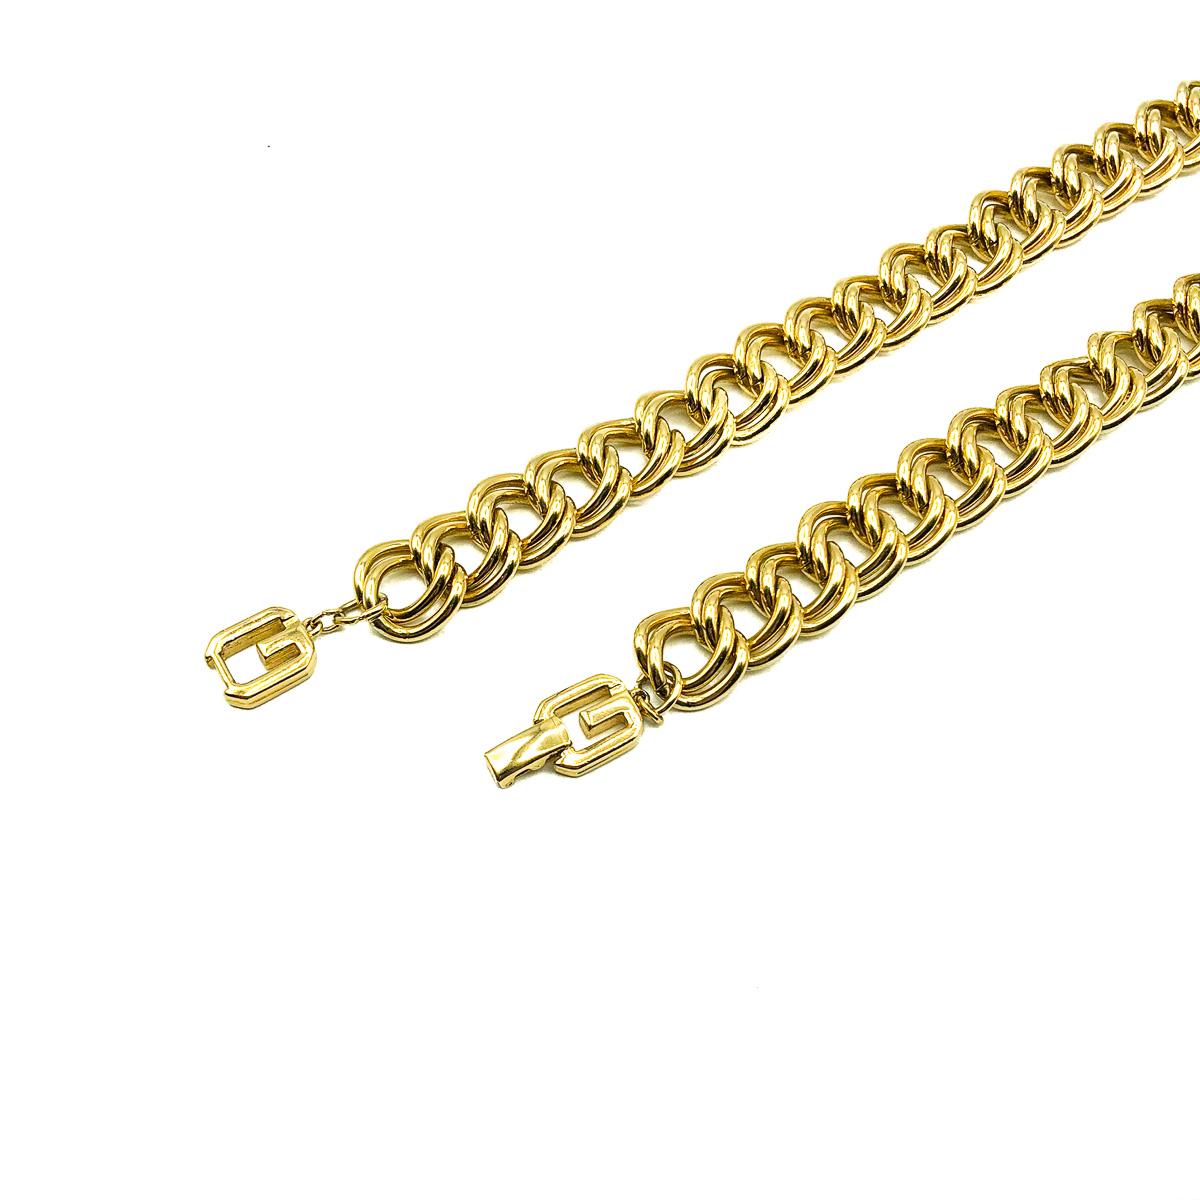 A very grand Vintage Givenchy Chunky Chain. One of the late great 20th century couturiers, Hubert de Givenchy founded his namesake fashion house in 1952, destined to leave an indelible mark on fashion history. Famed for disrupting fashion codes of